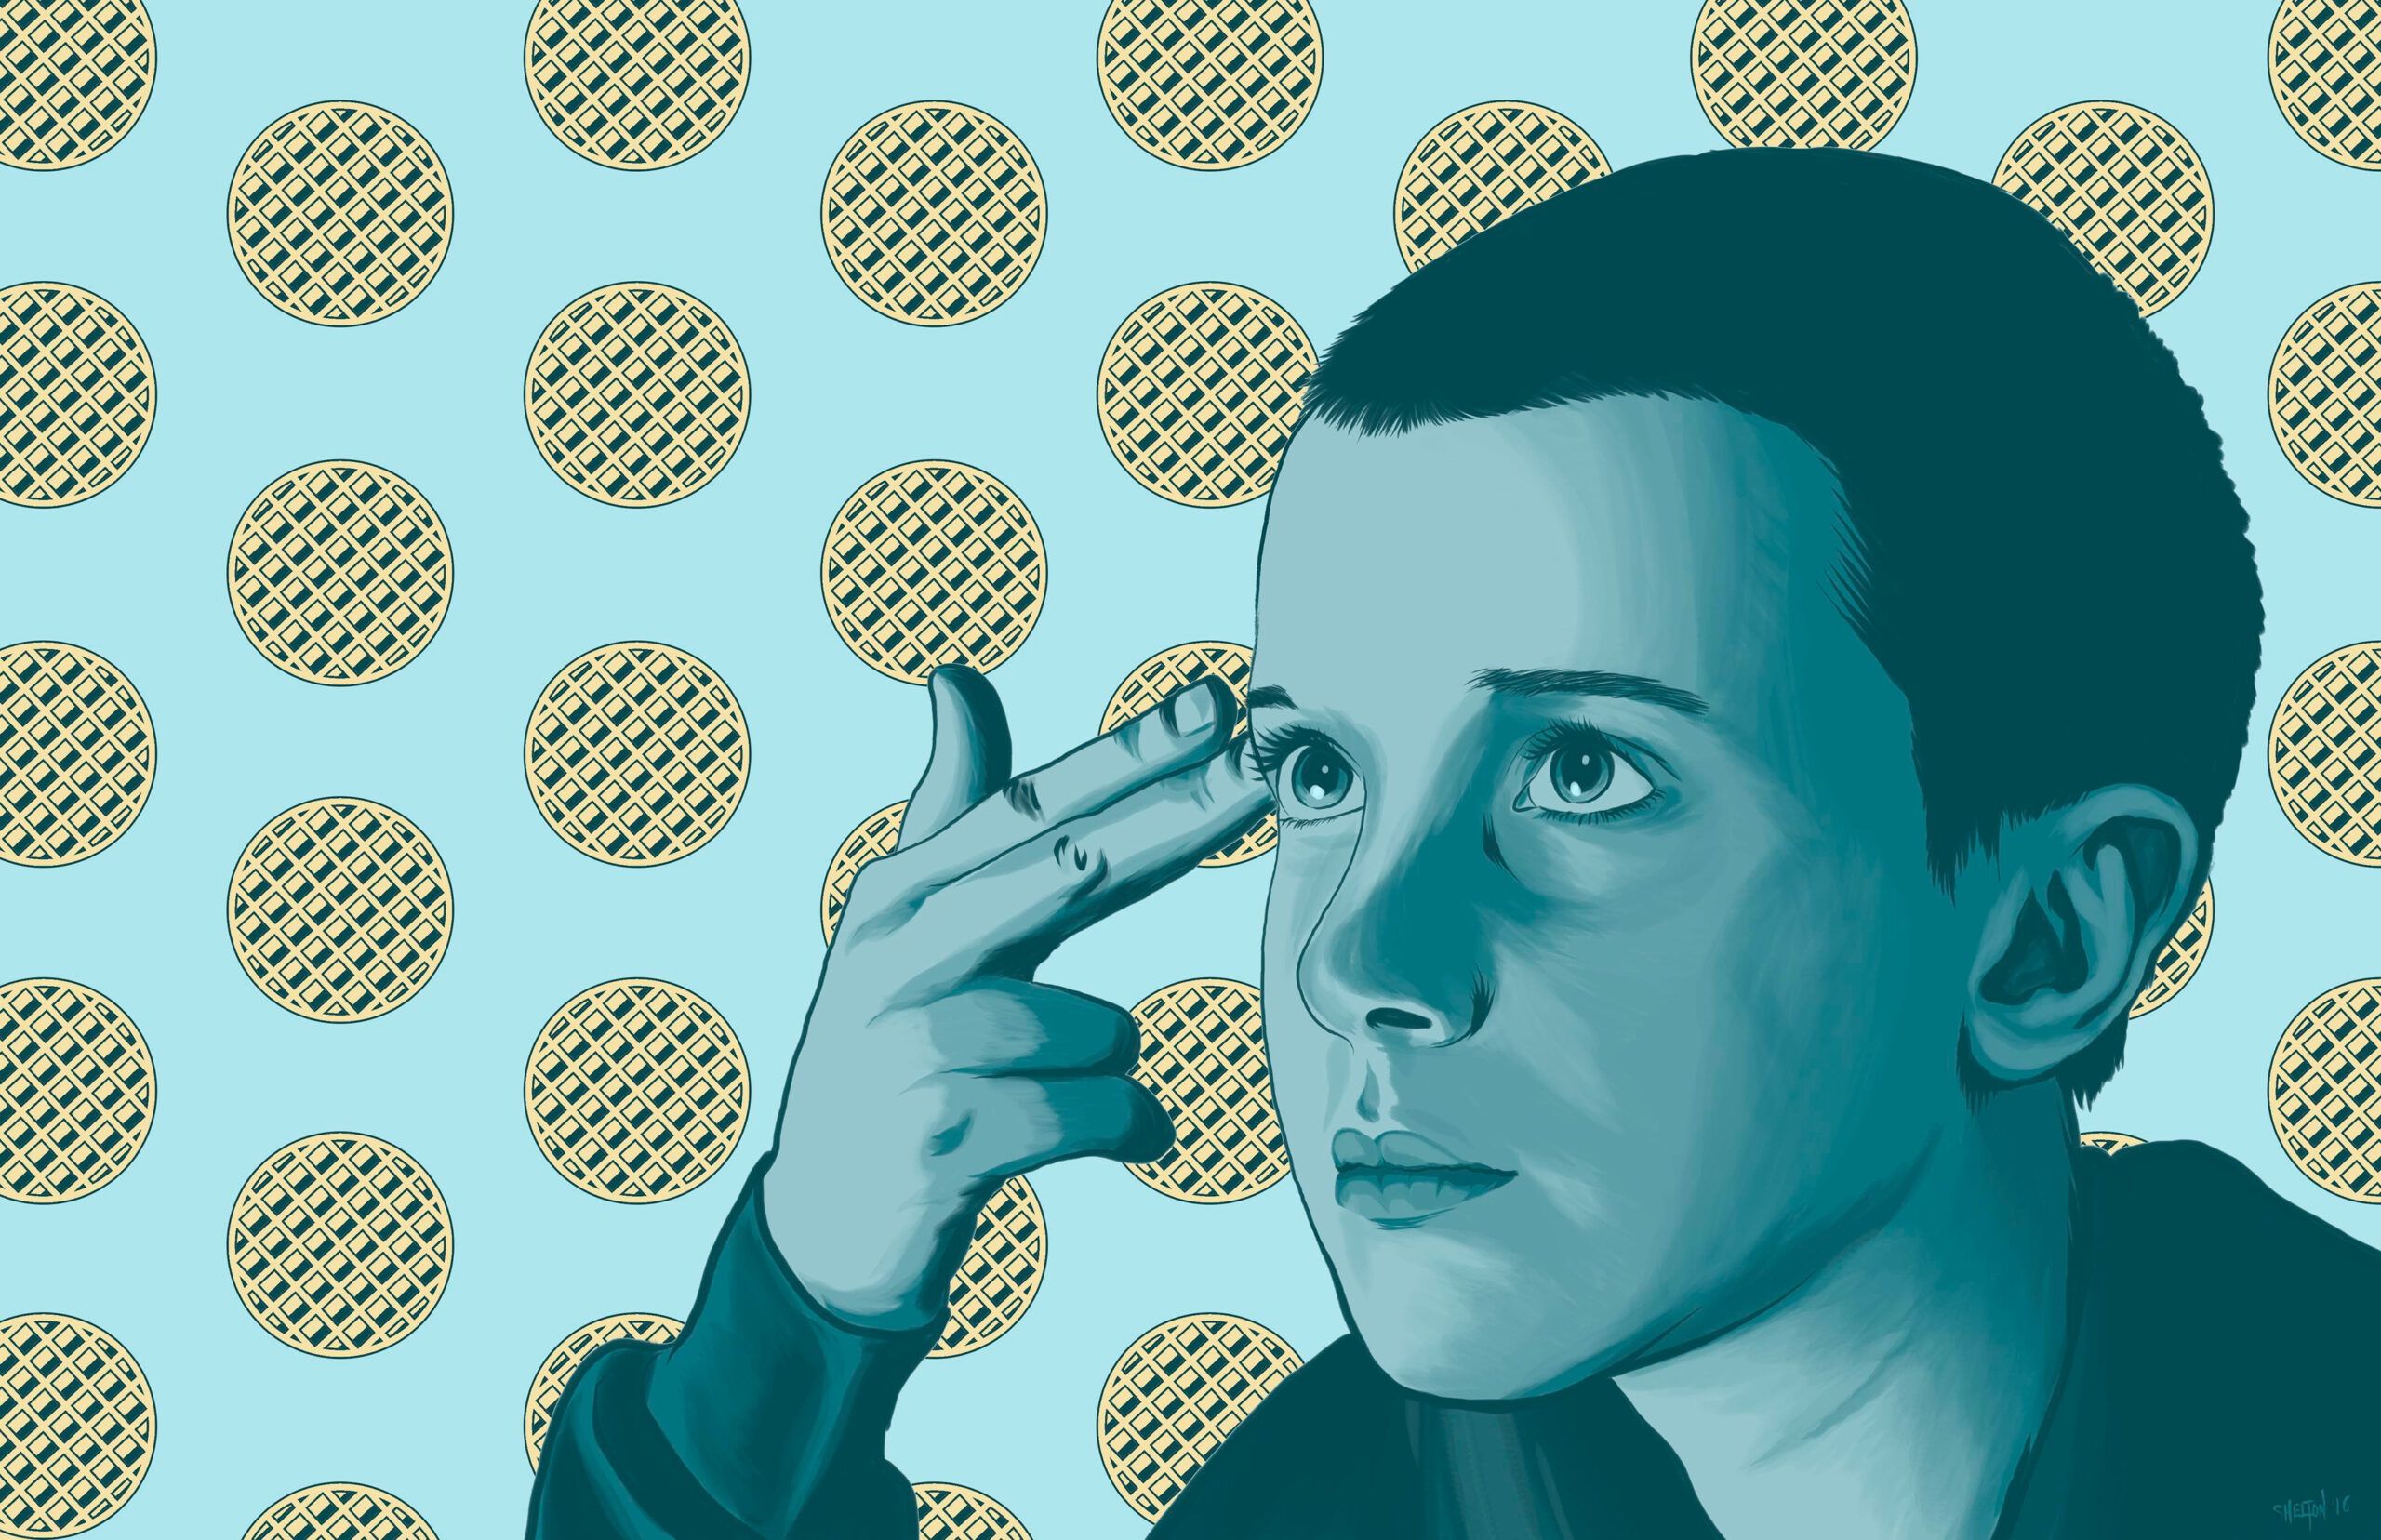 An illustration of Eleven from Stranger Things with a blue background and waffles on it. - Stranger Things